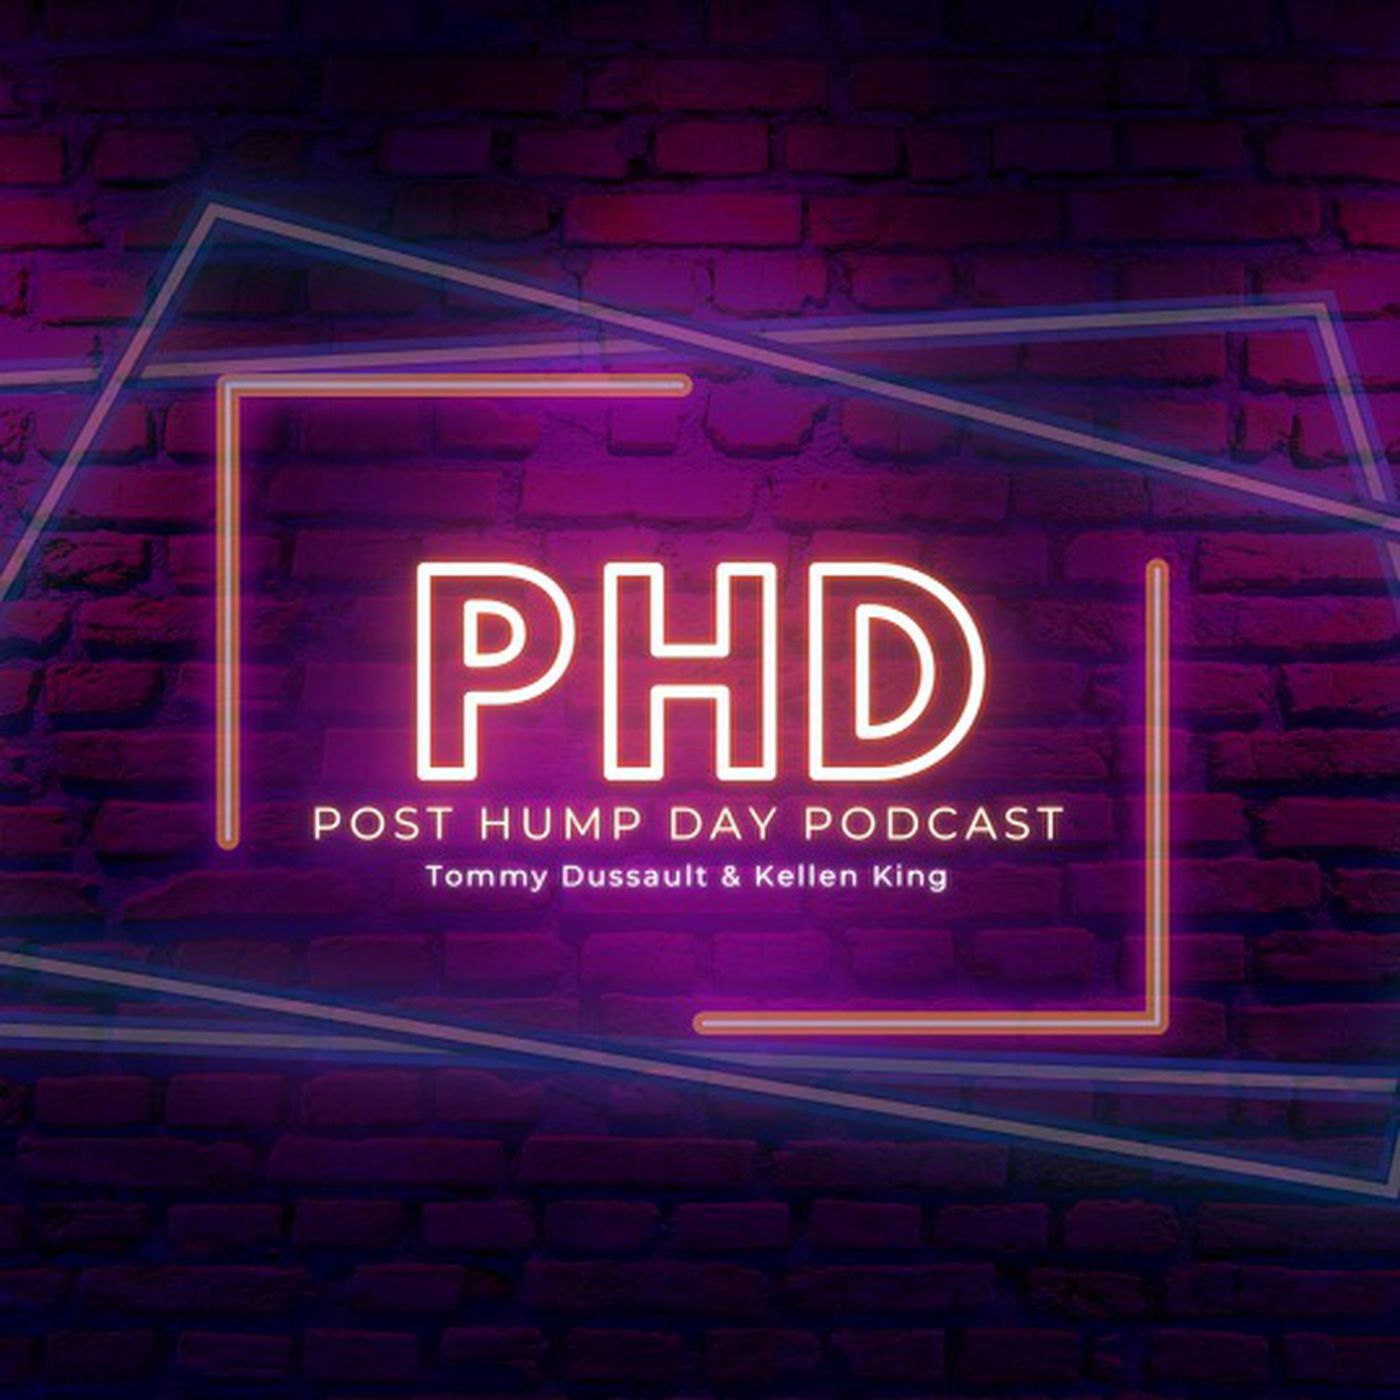 Post Hump Day Podcast